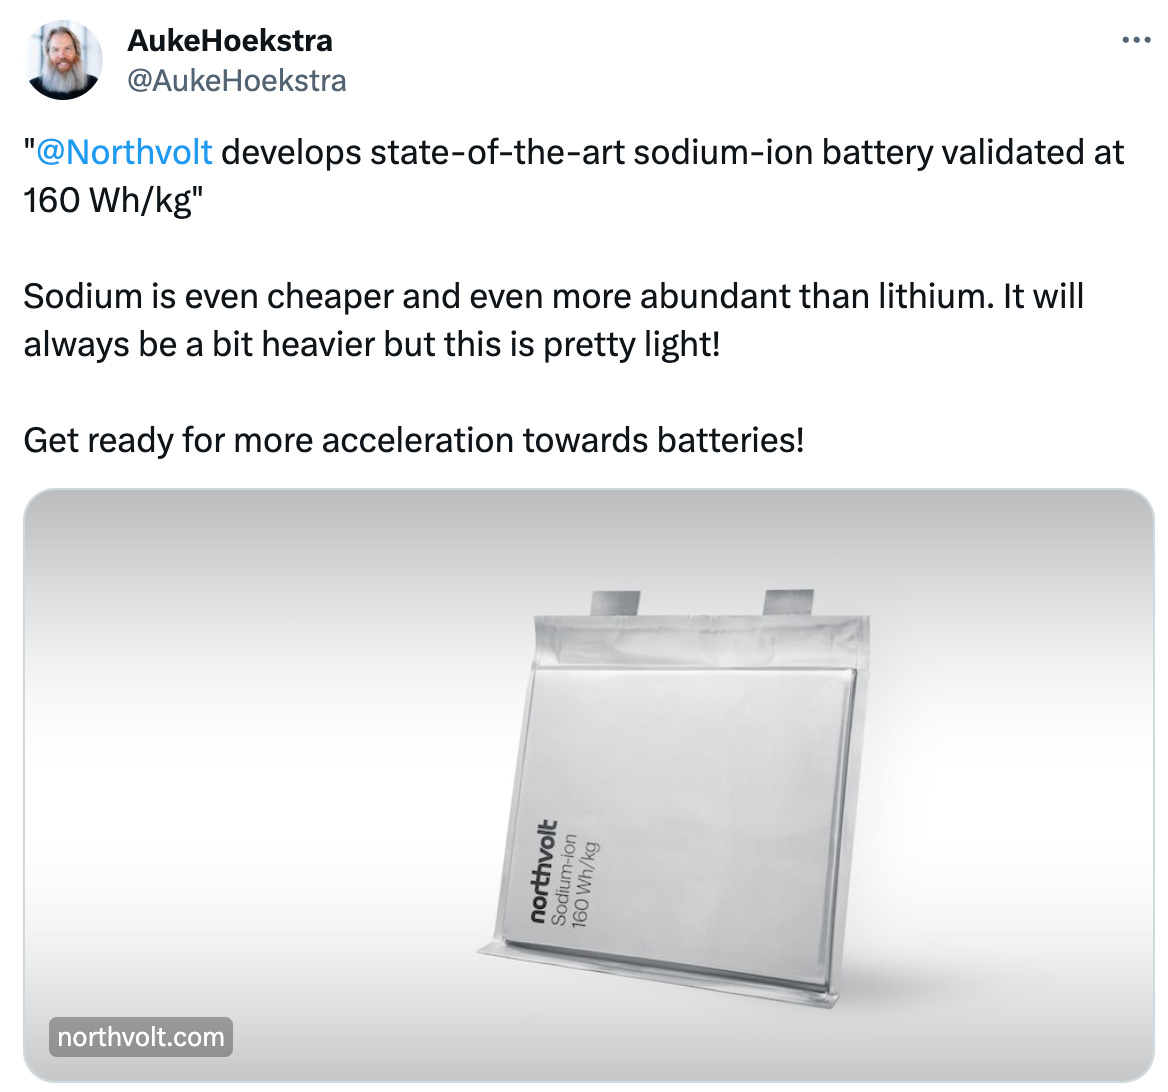  See new posts Conversation AukeHoekstra @AukeHoekstra " @Northvolt  develops state-of-the-art sodium-ion battery validated at 160 Wh/kg"  Sodium is even cheaper and even more abundant than lithium. It will always be a bit heavier but this is pretty light!  Get ready for more acceleration towards batteries!